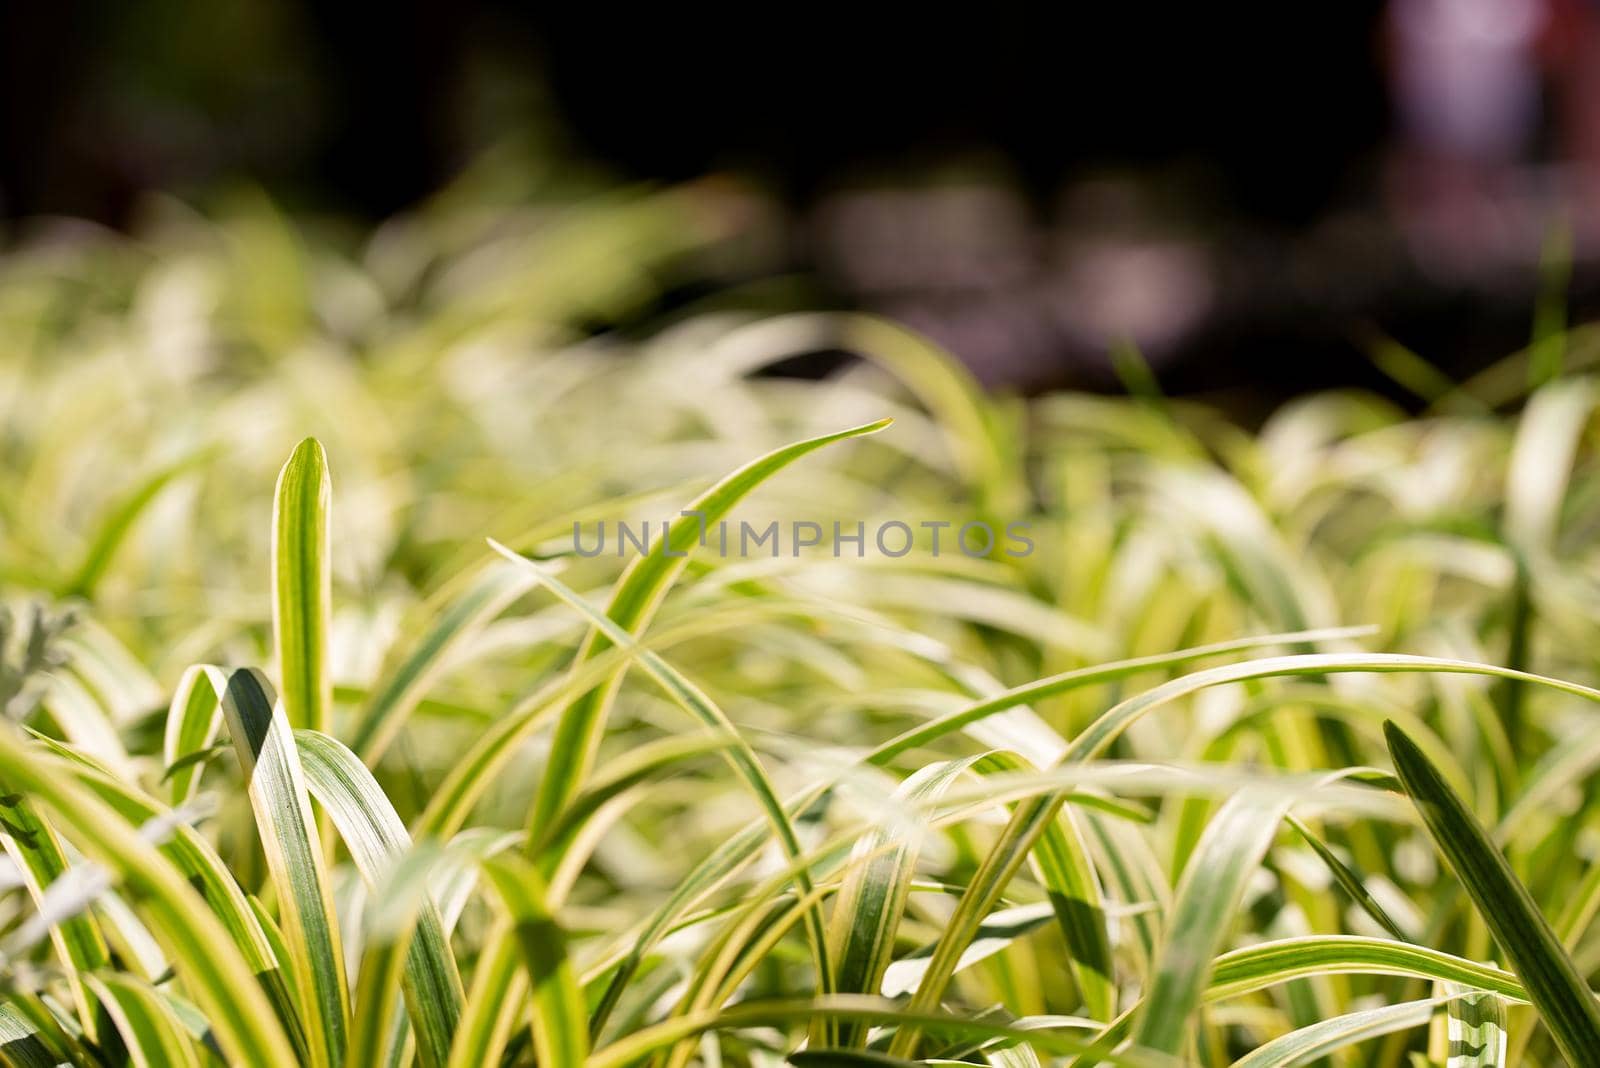 Abstract natural background of decorative plant similar to grass on a dark background